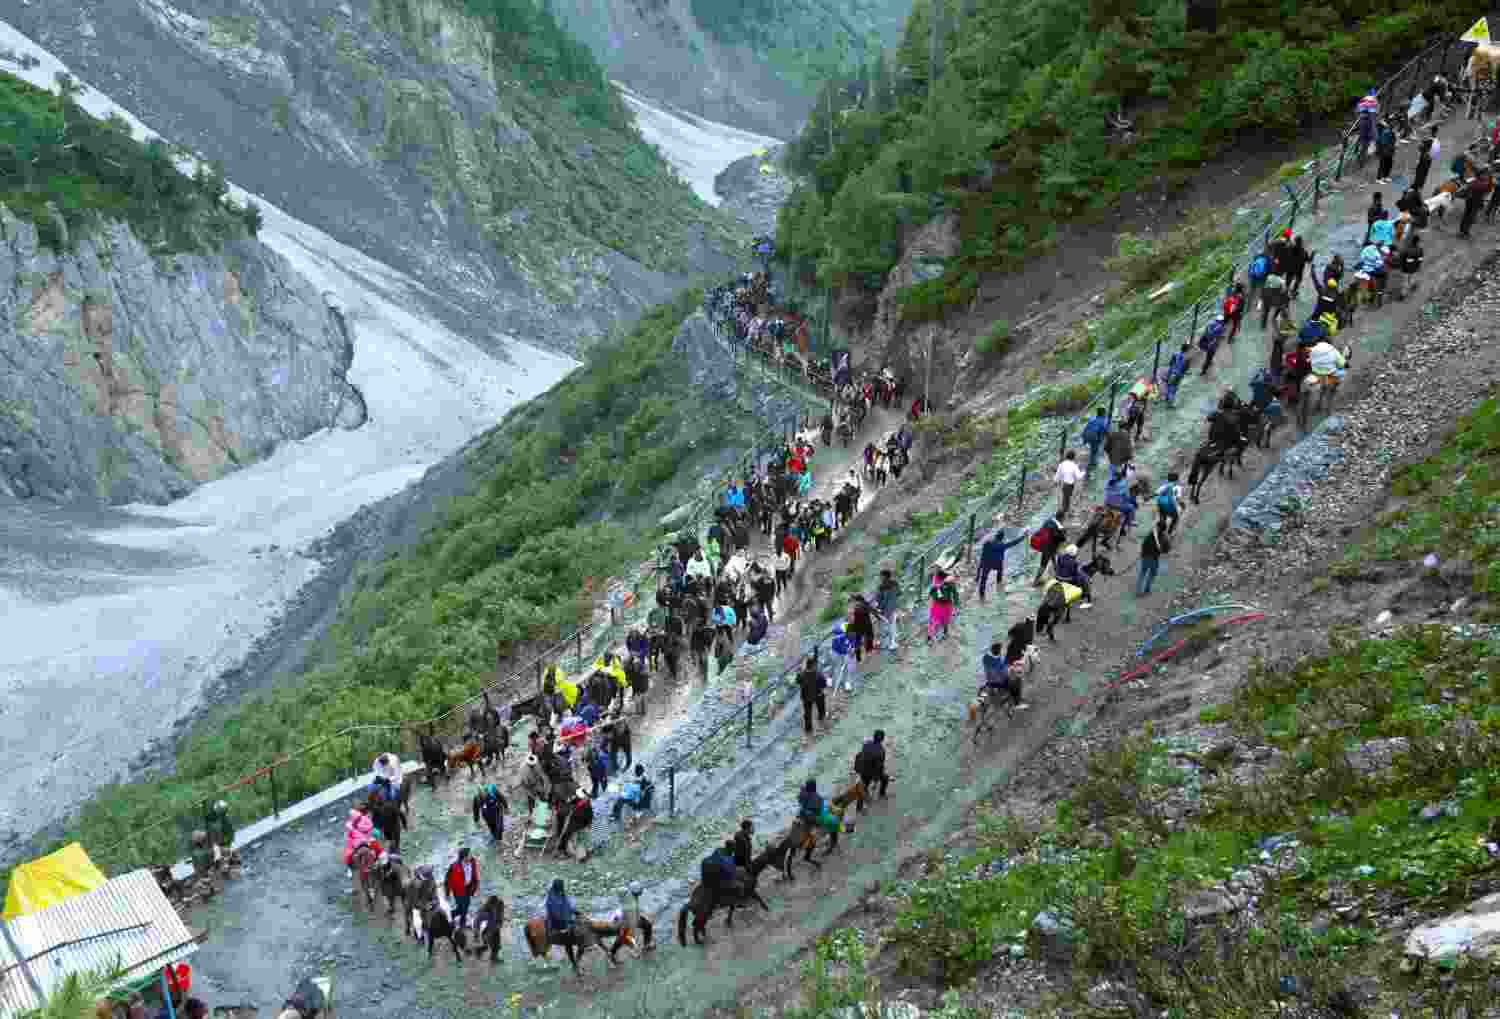 Amarnath Yatra contract to banned firm prompts investigation